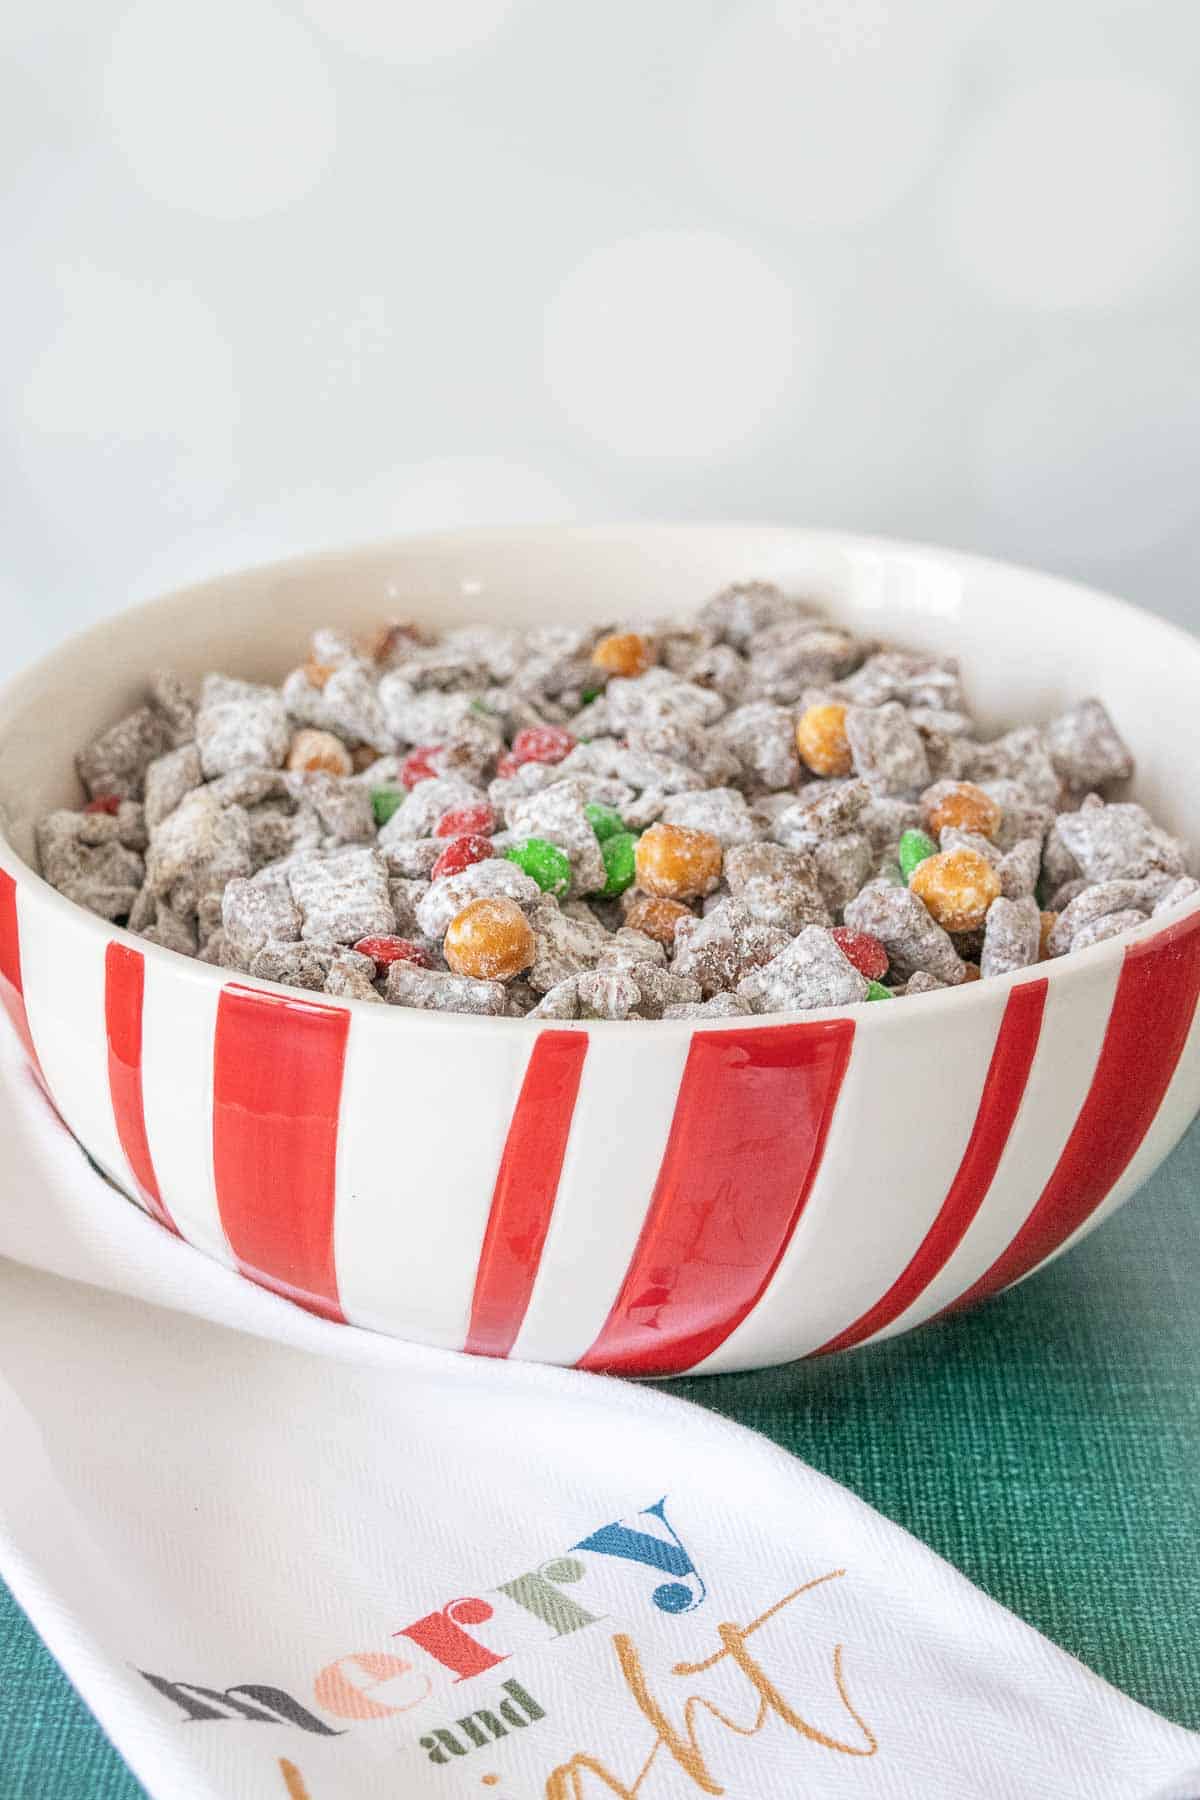 Red and white candy cane striped bowl filled with reindeer chow snack mix.